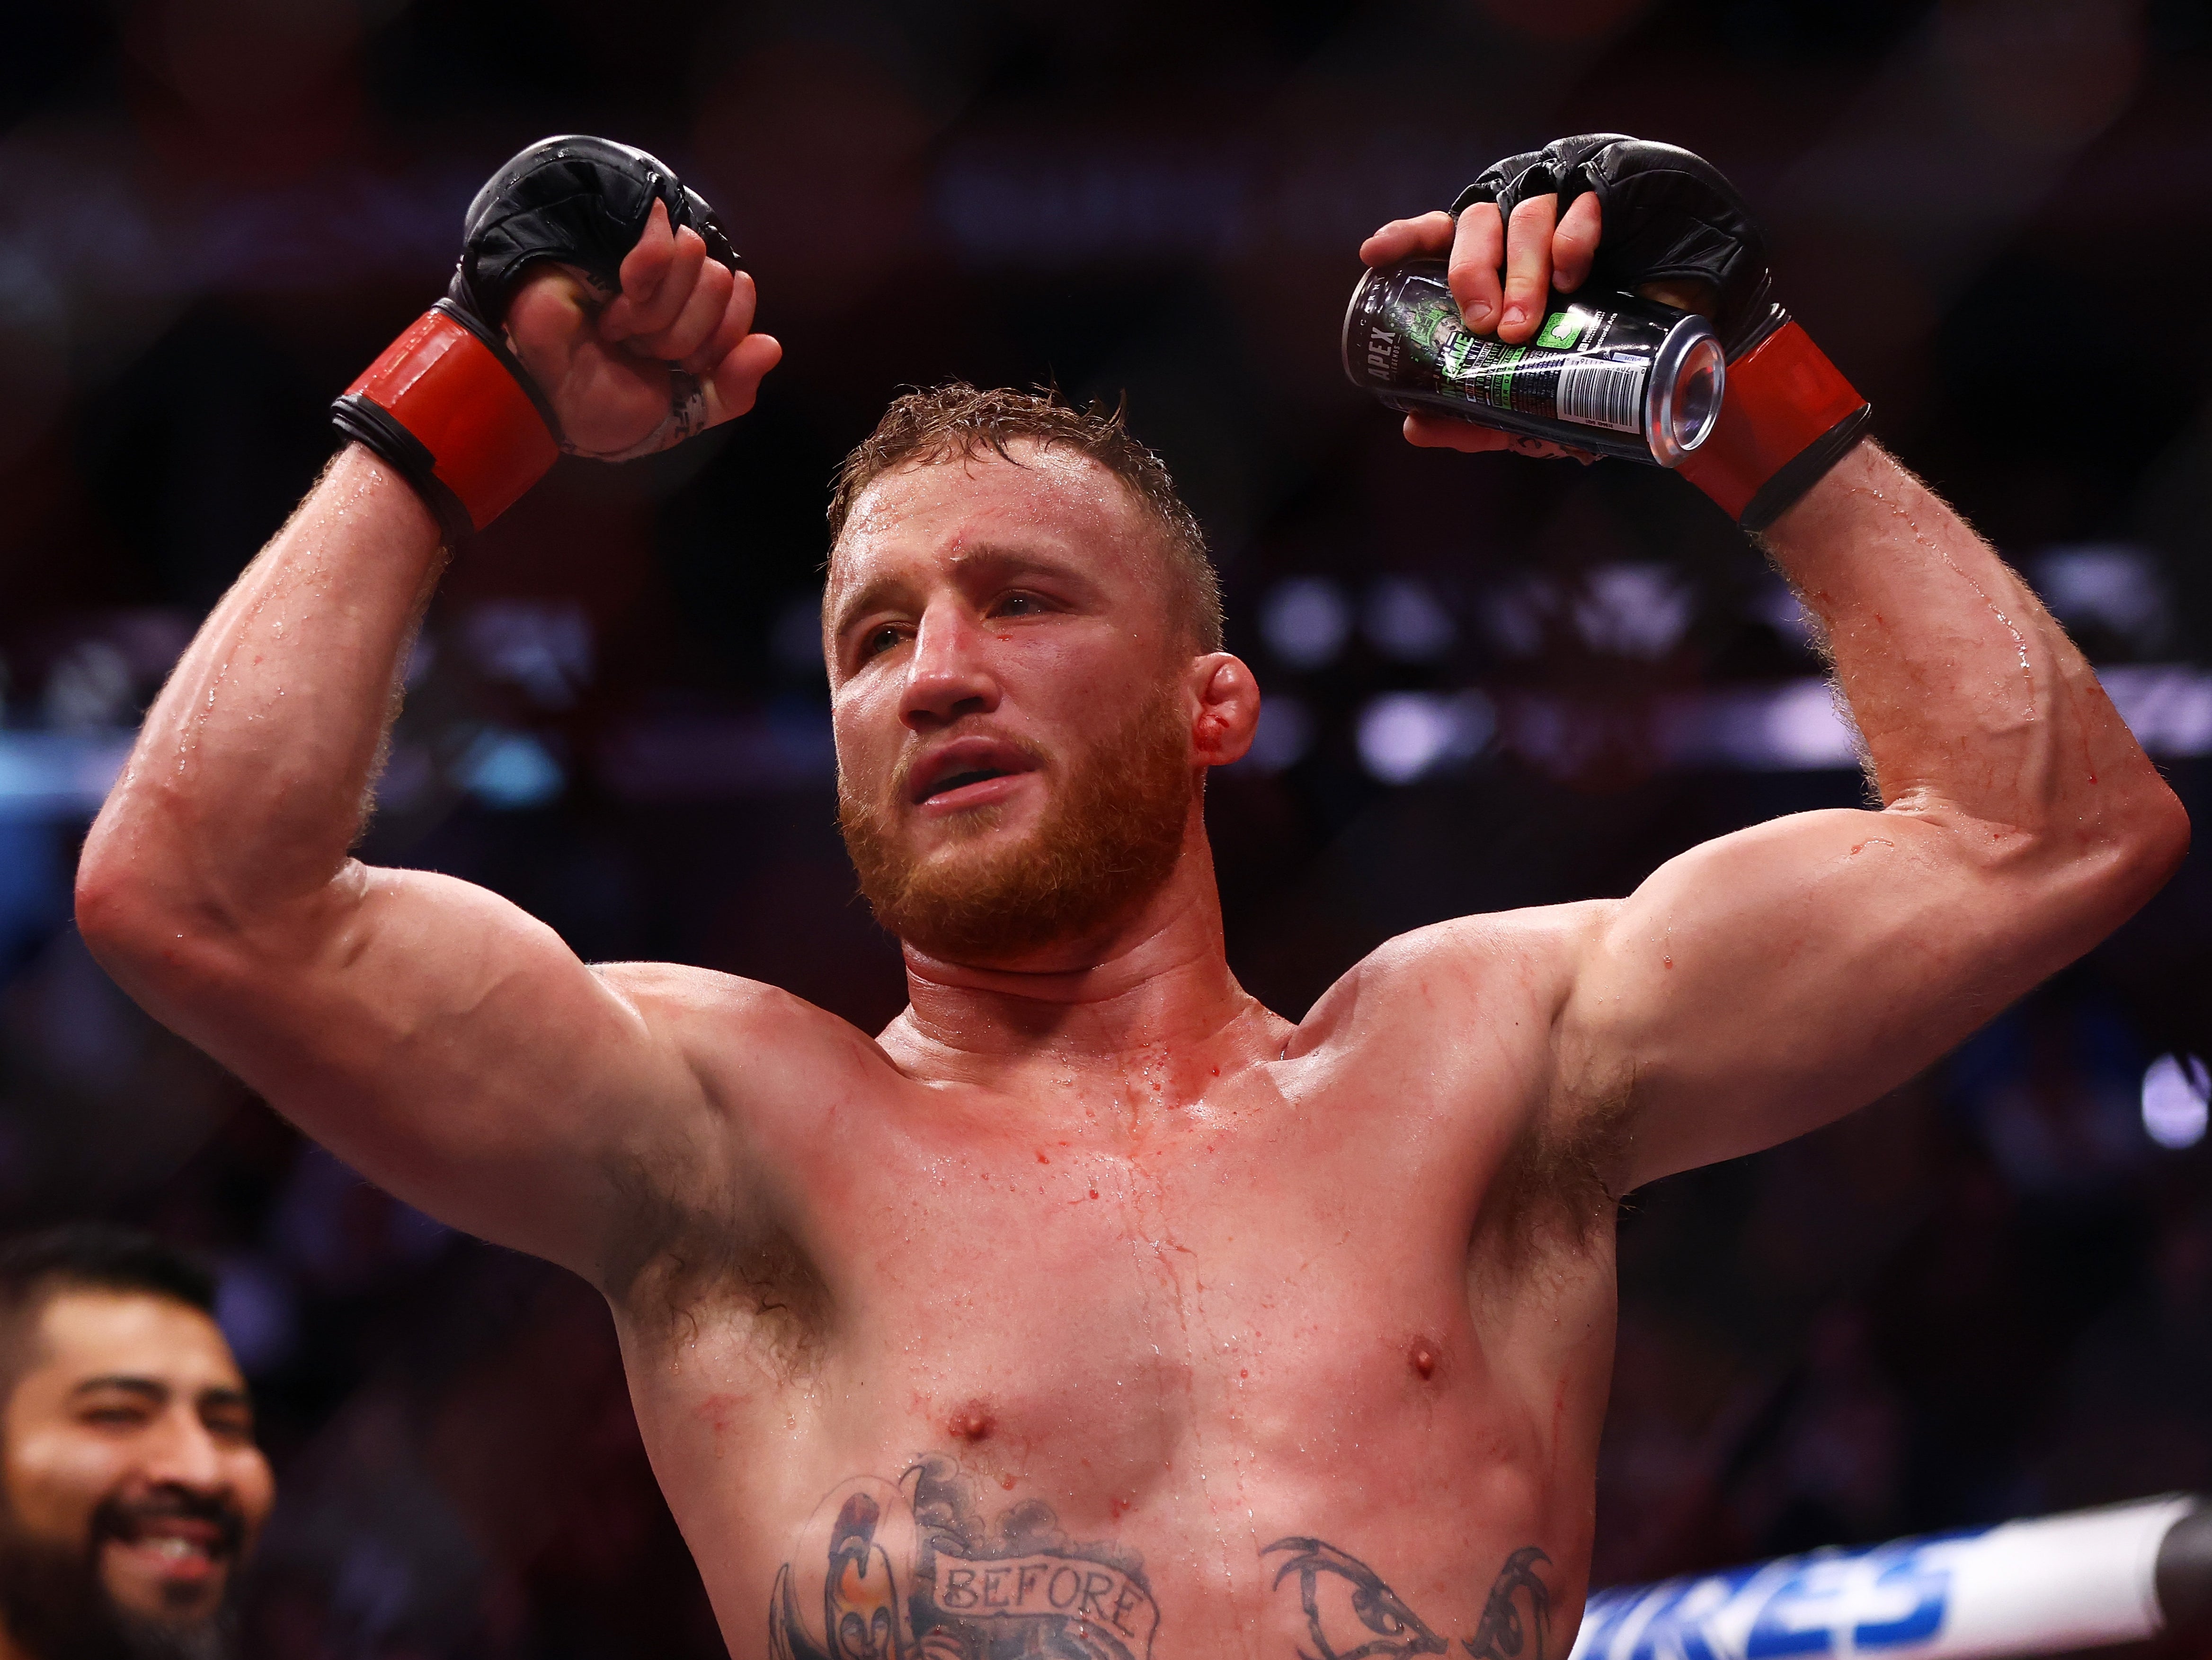 Gaethje’s wrestling skills are significant but the American prefers to brawl